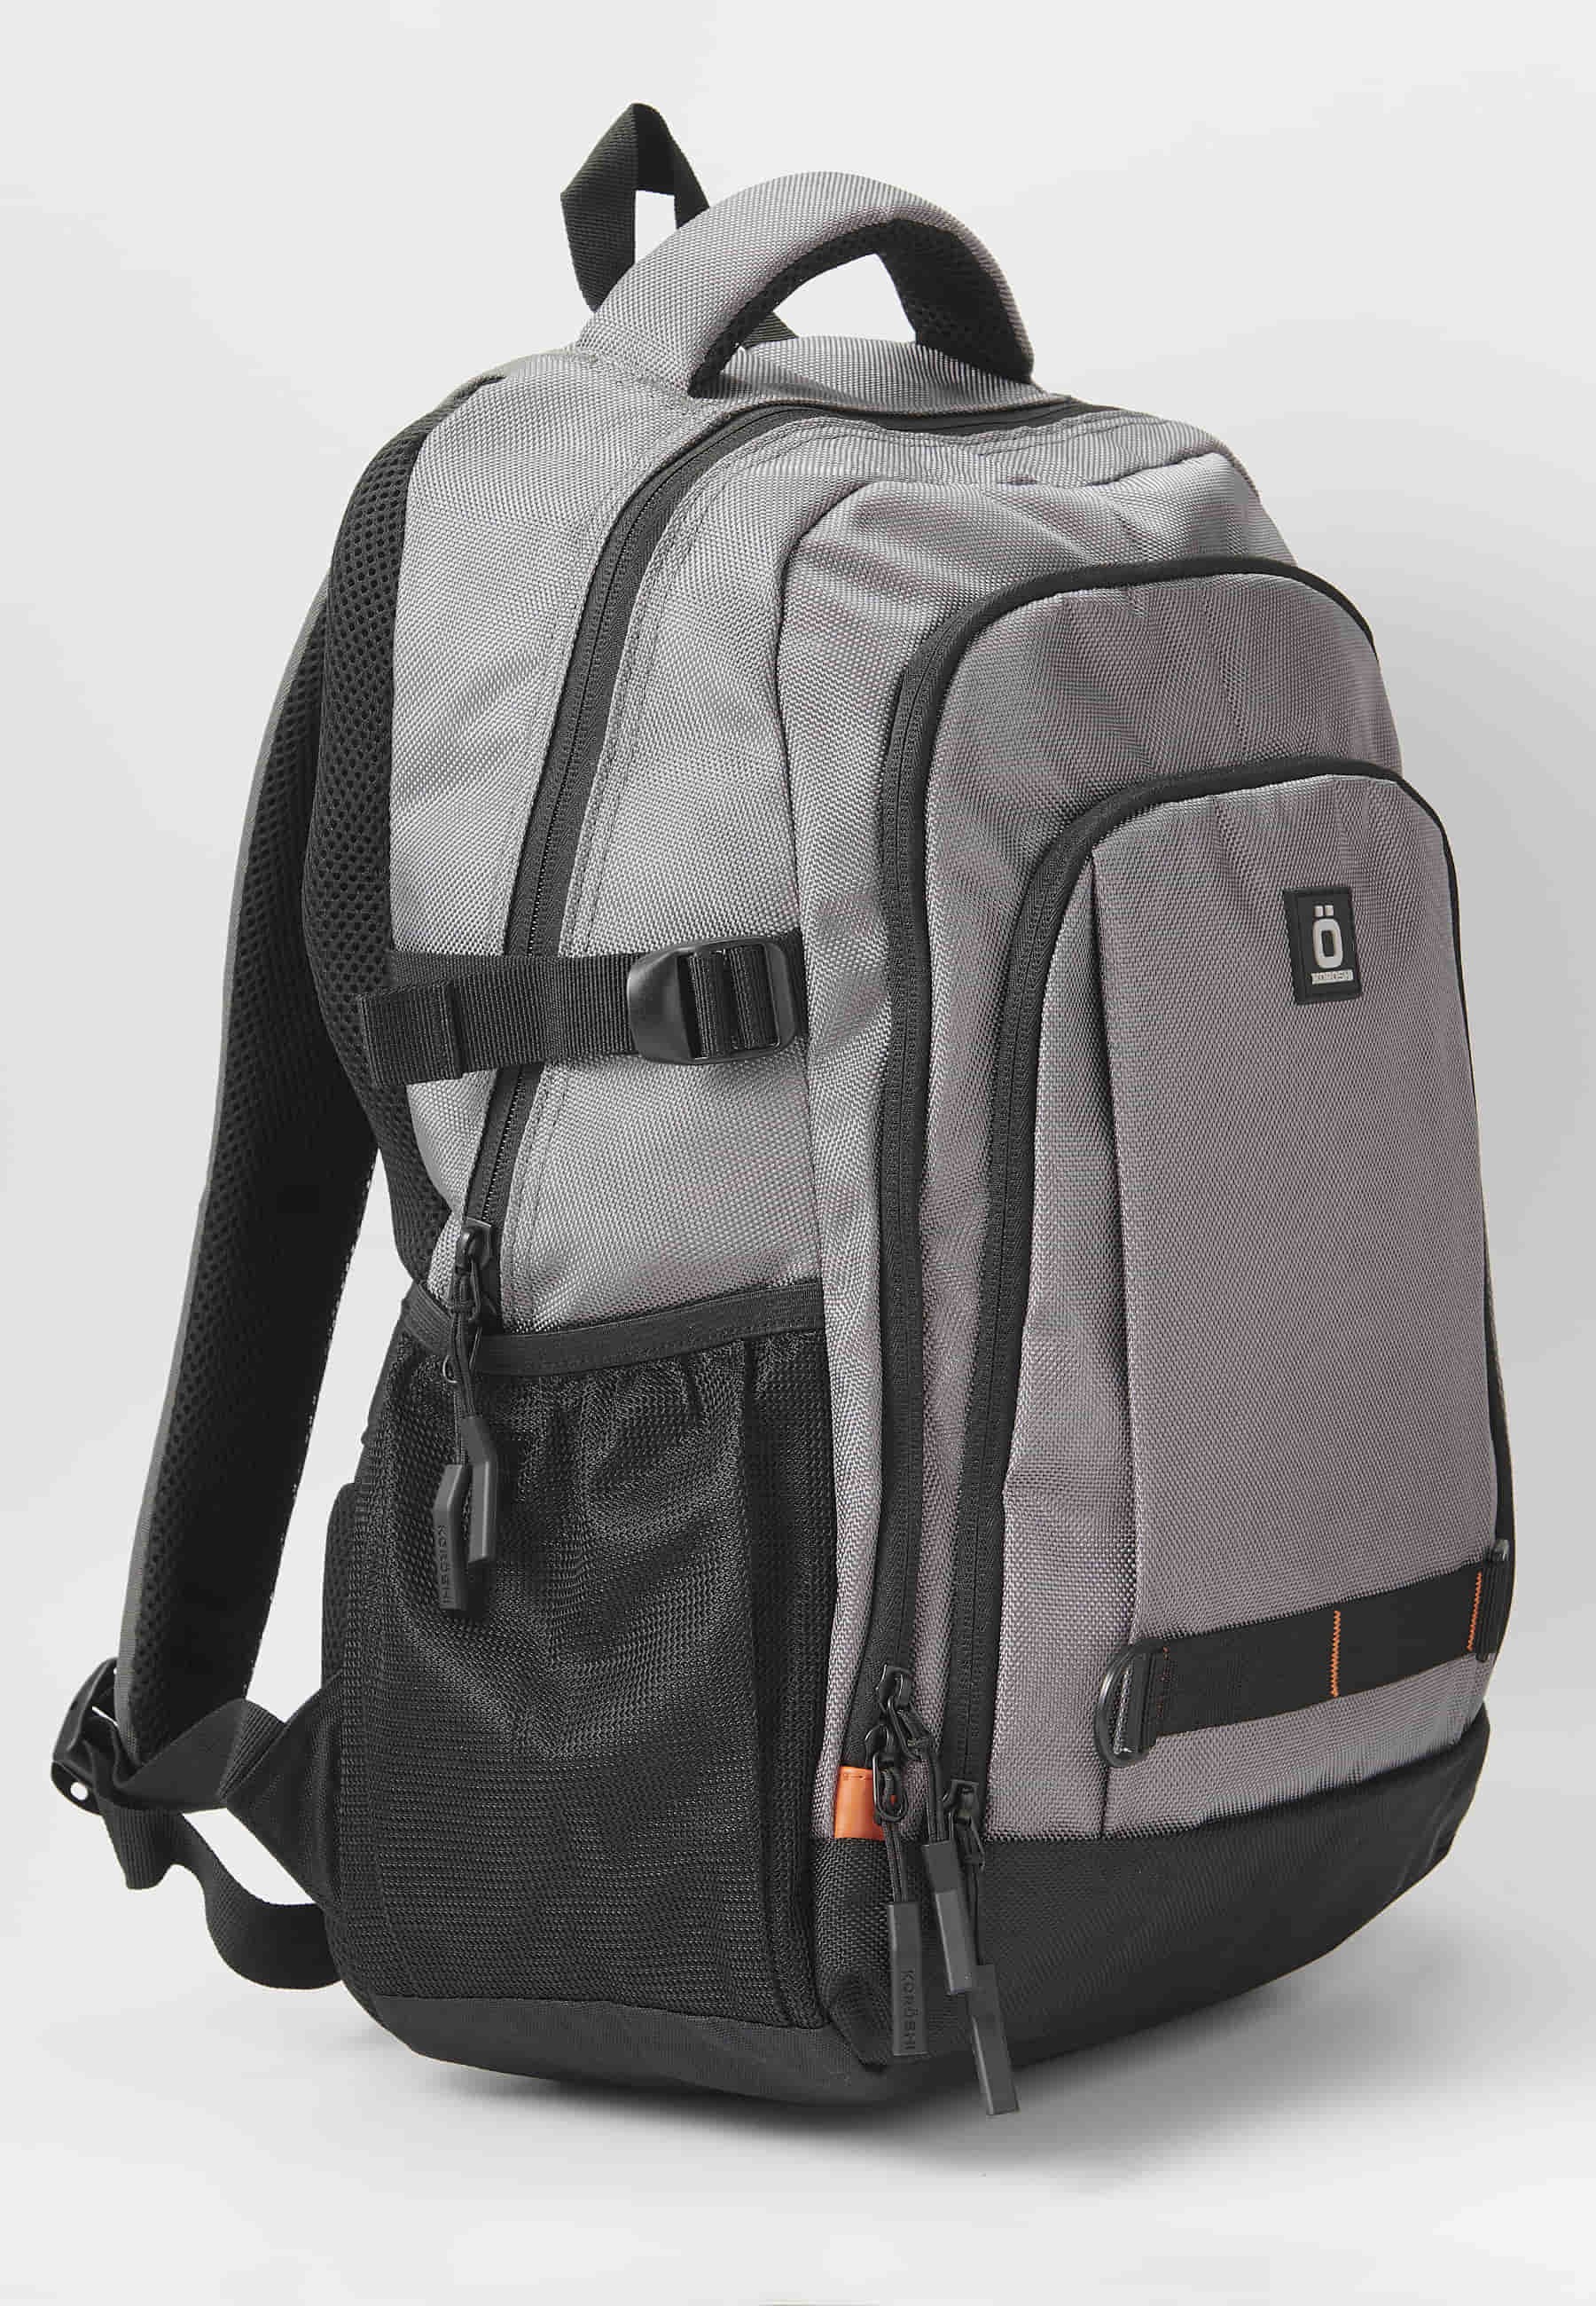 Koröshi backpack with three zippered compartments, one for laptop, with Gray interior pockets 5